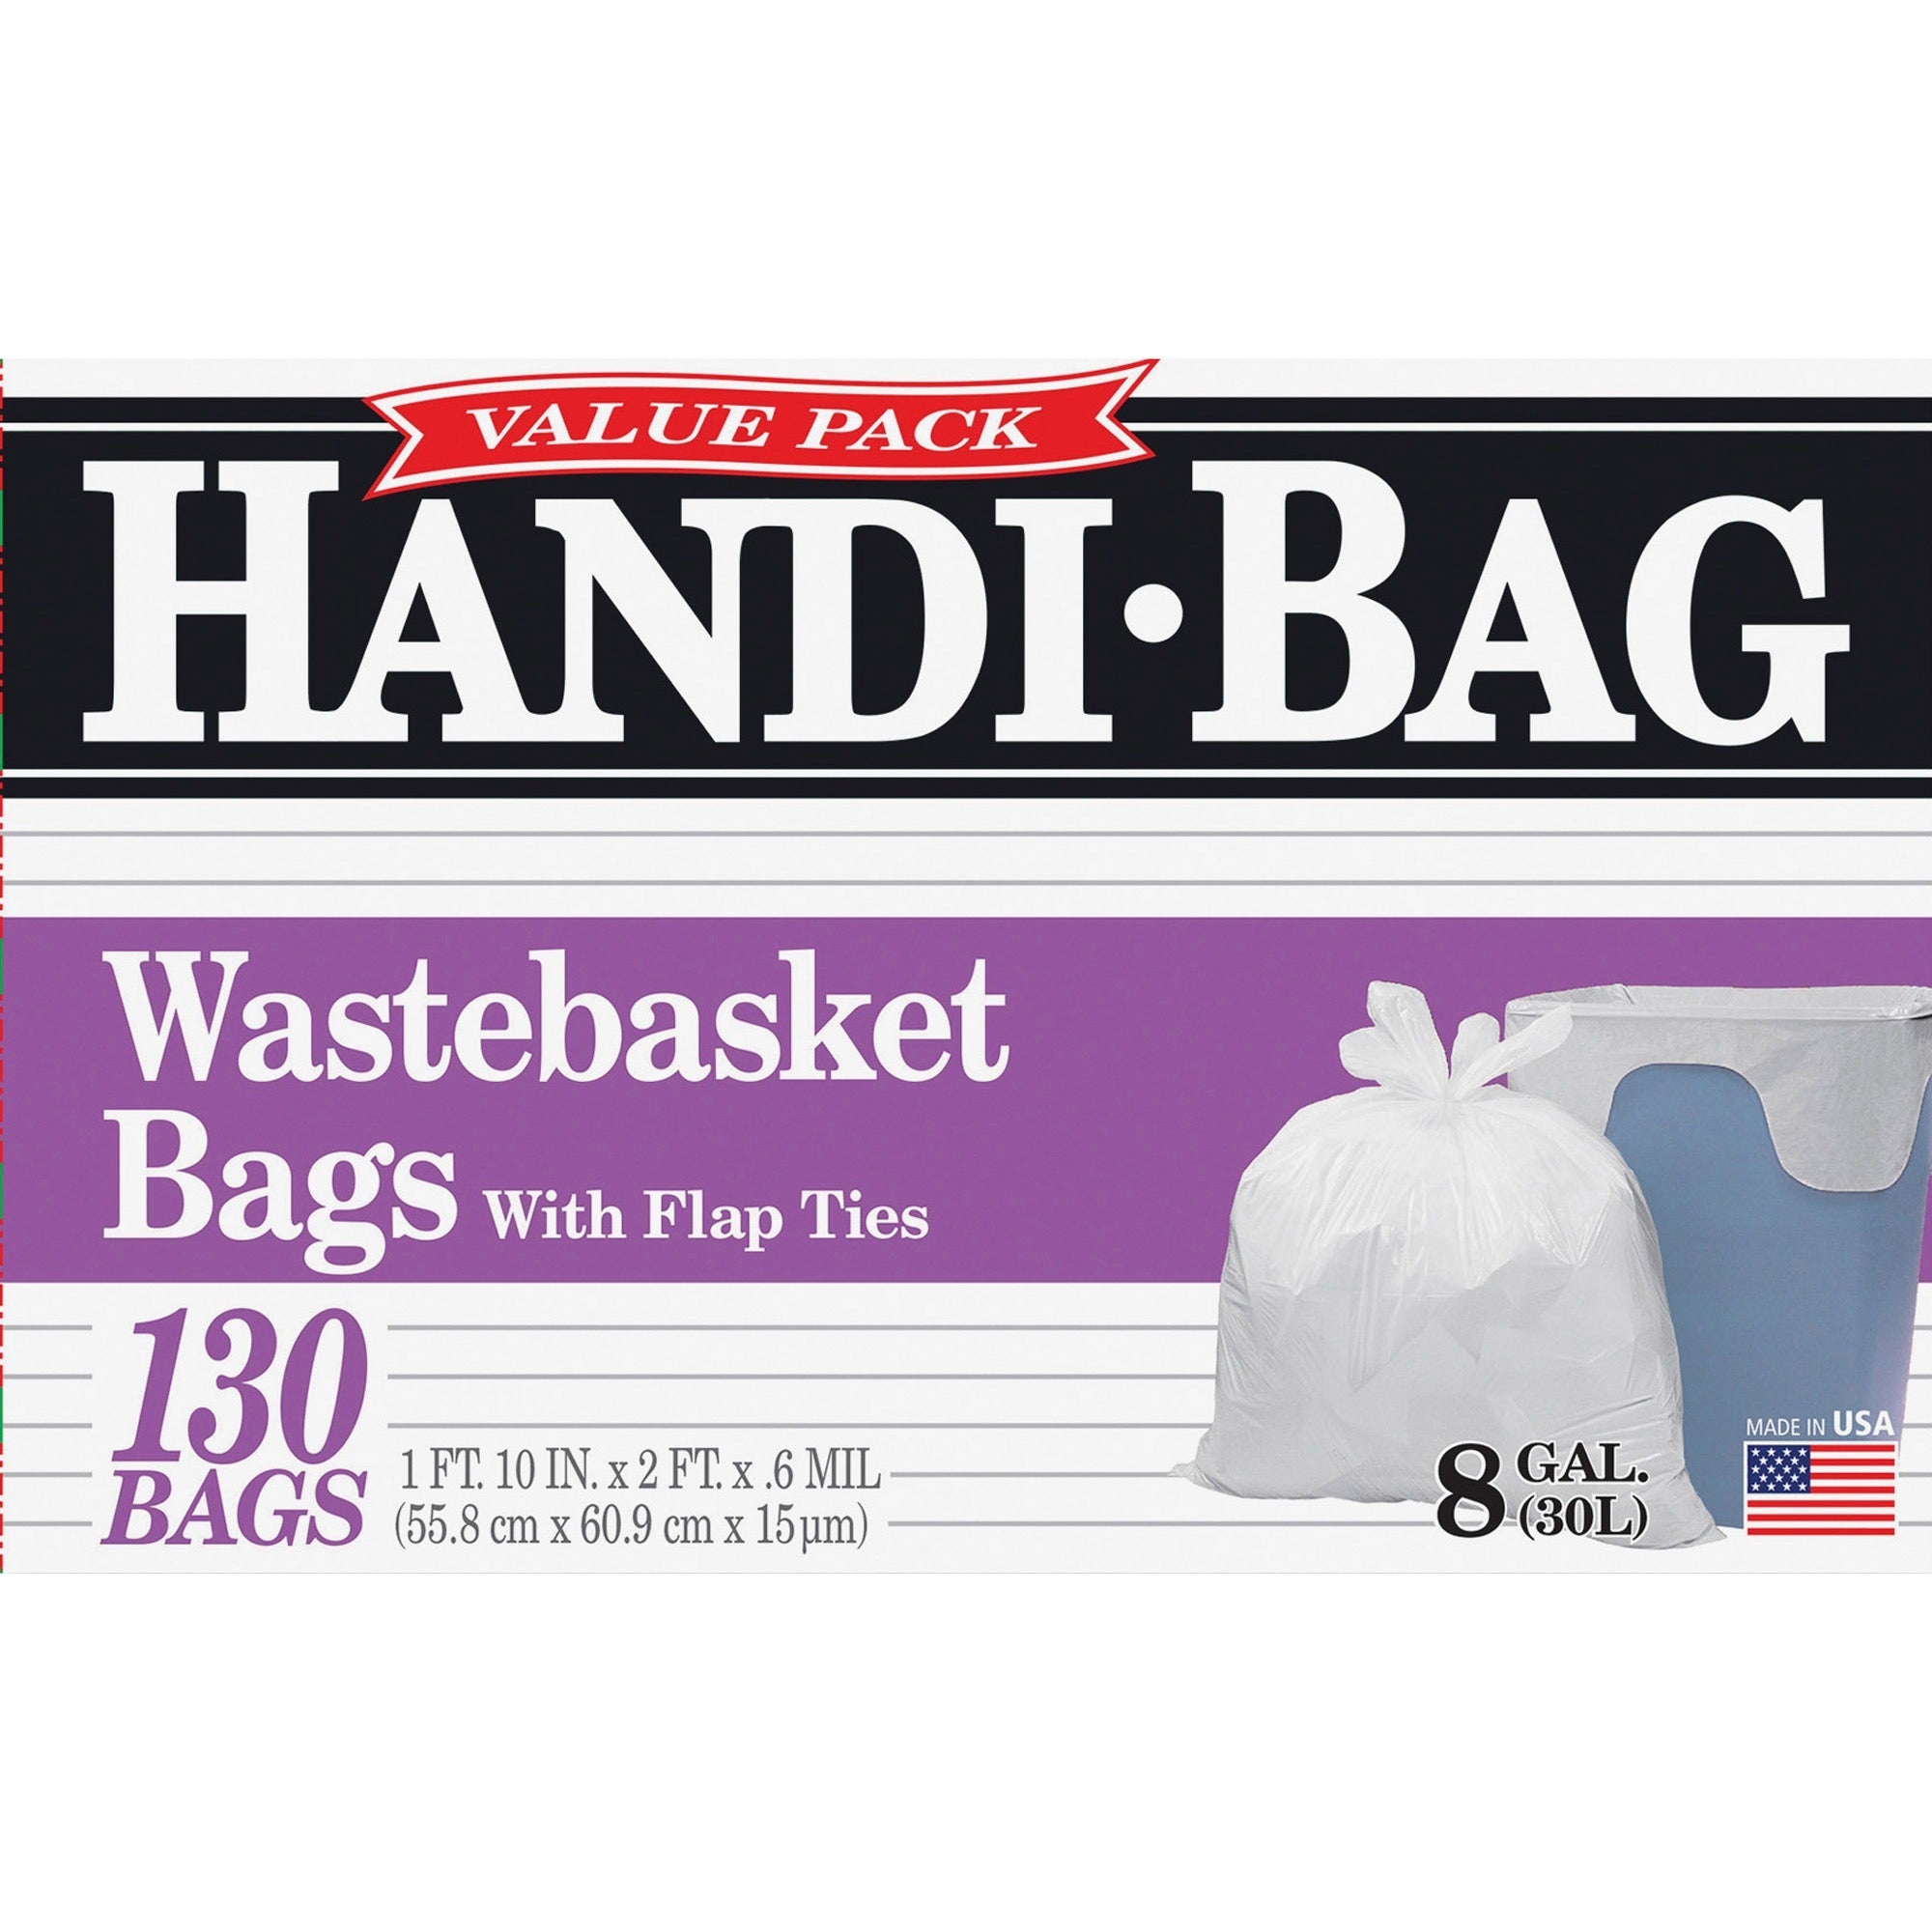 berry-handi-bag-wastebasket-bags-small-size-8-gal-capacity-2150-width-x-24-length-060-mil-15-micron-thickness-white-hexene-resin-6-carton-130-per-box-home-office_wbihab6fw130ct - 2